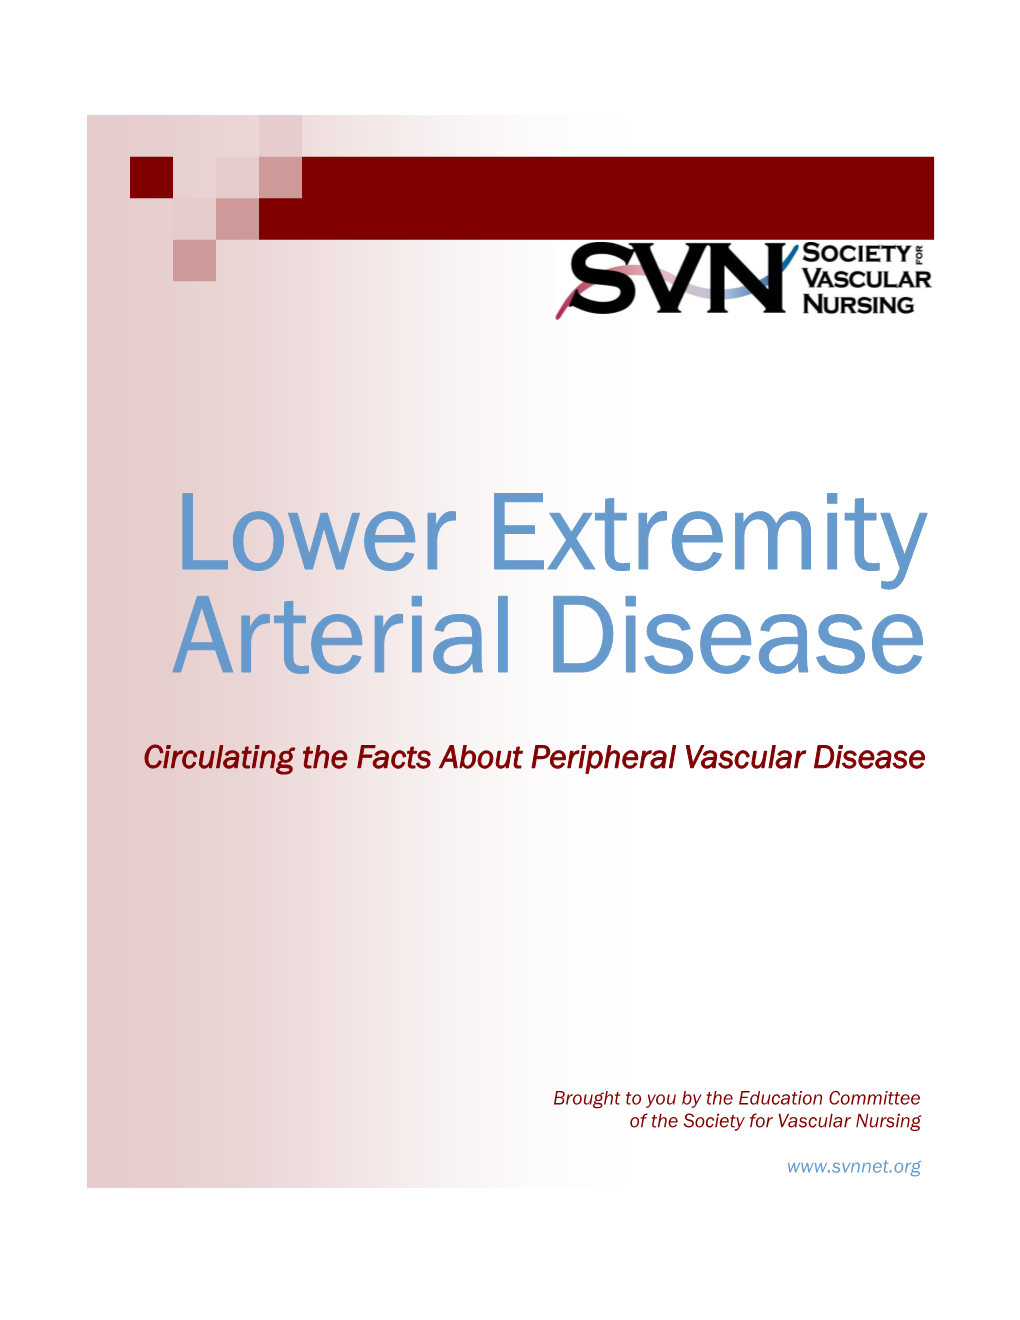 Circulating the Facts About Peripheral Vascular Disease